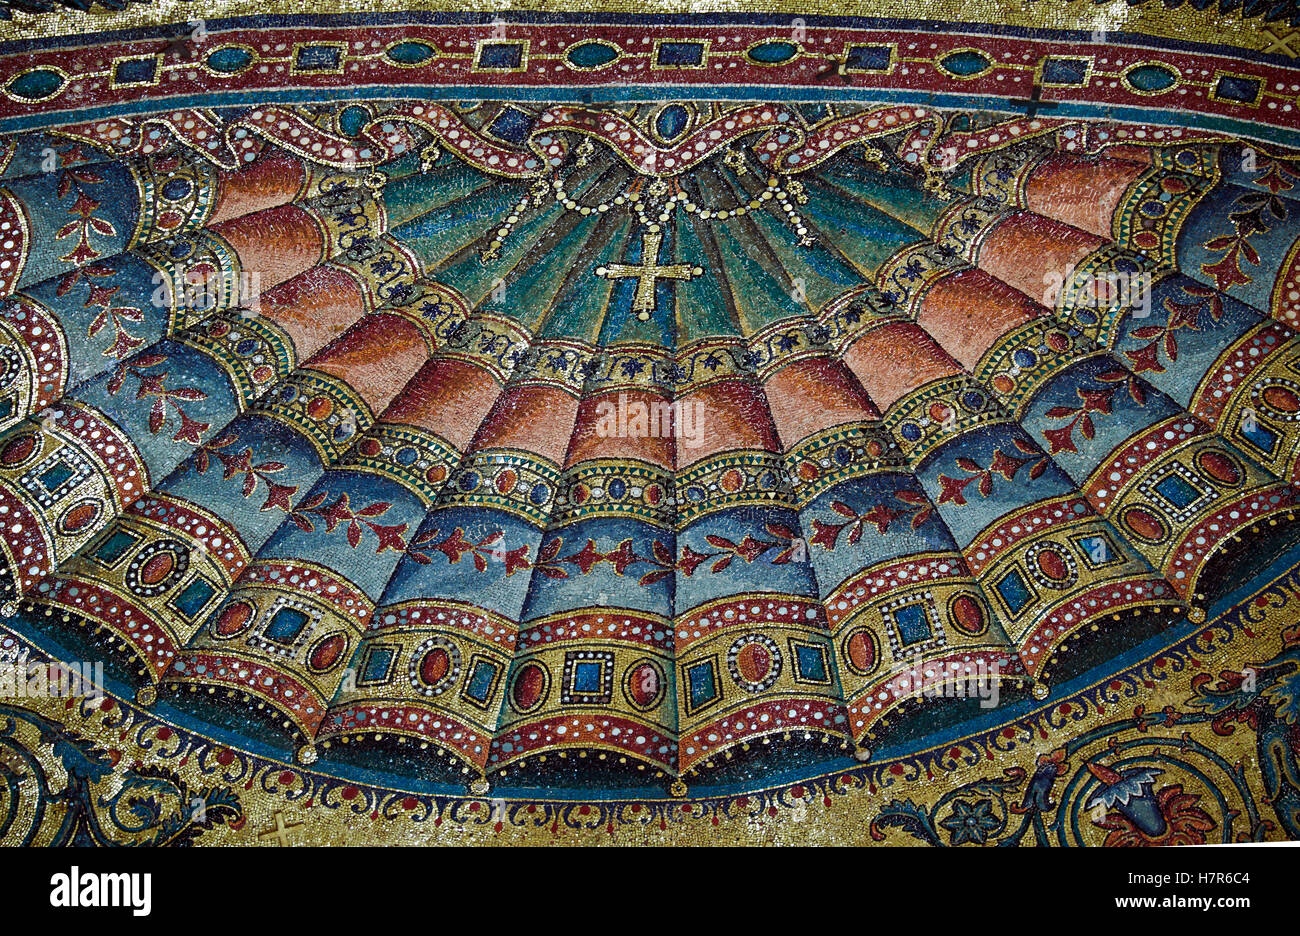 Detail of mosaic in the apse of the Basilica of Santa Maria Maggiore, Rome Italy. Stock Photo